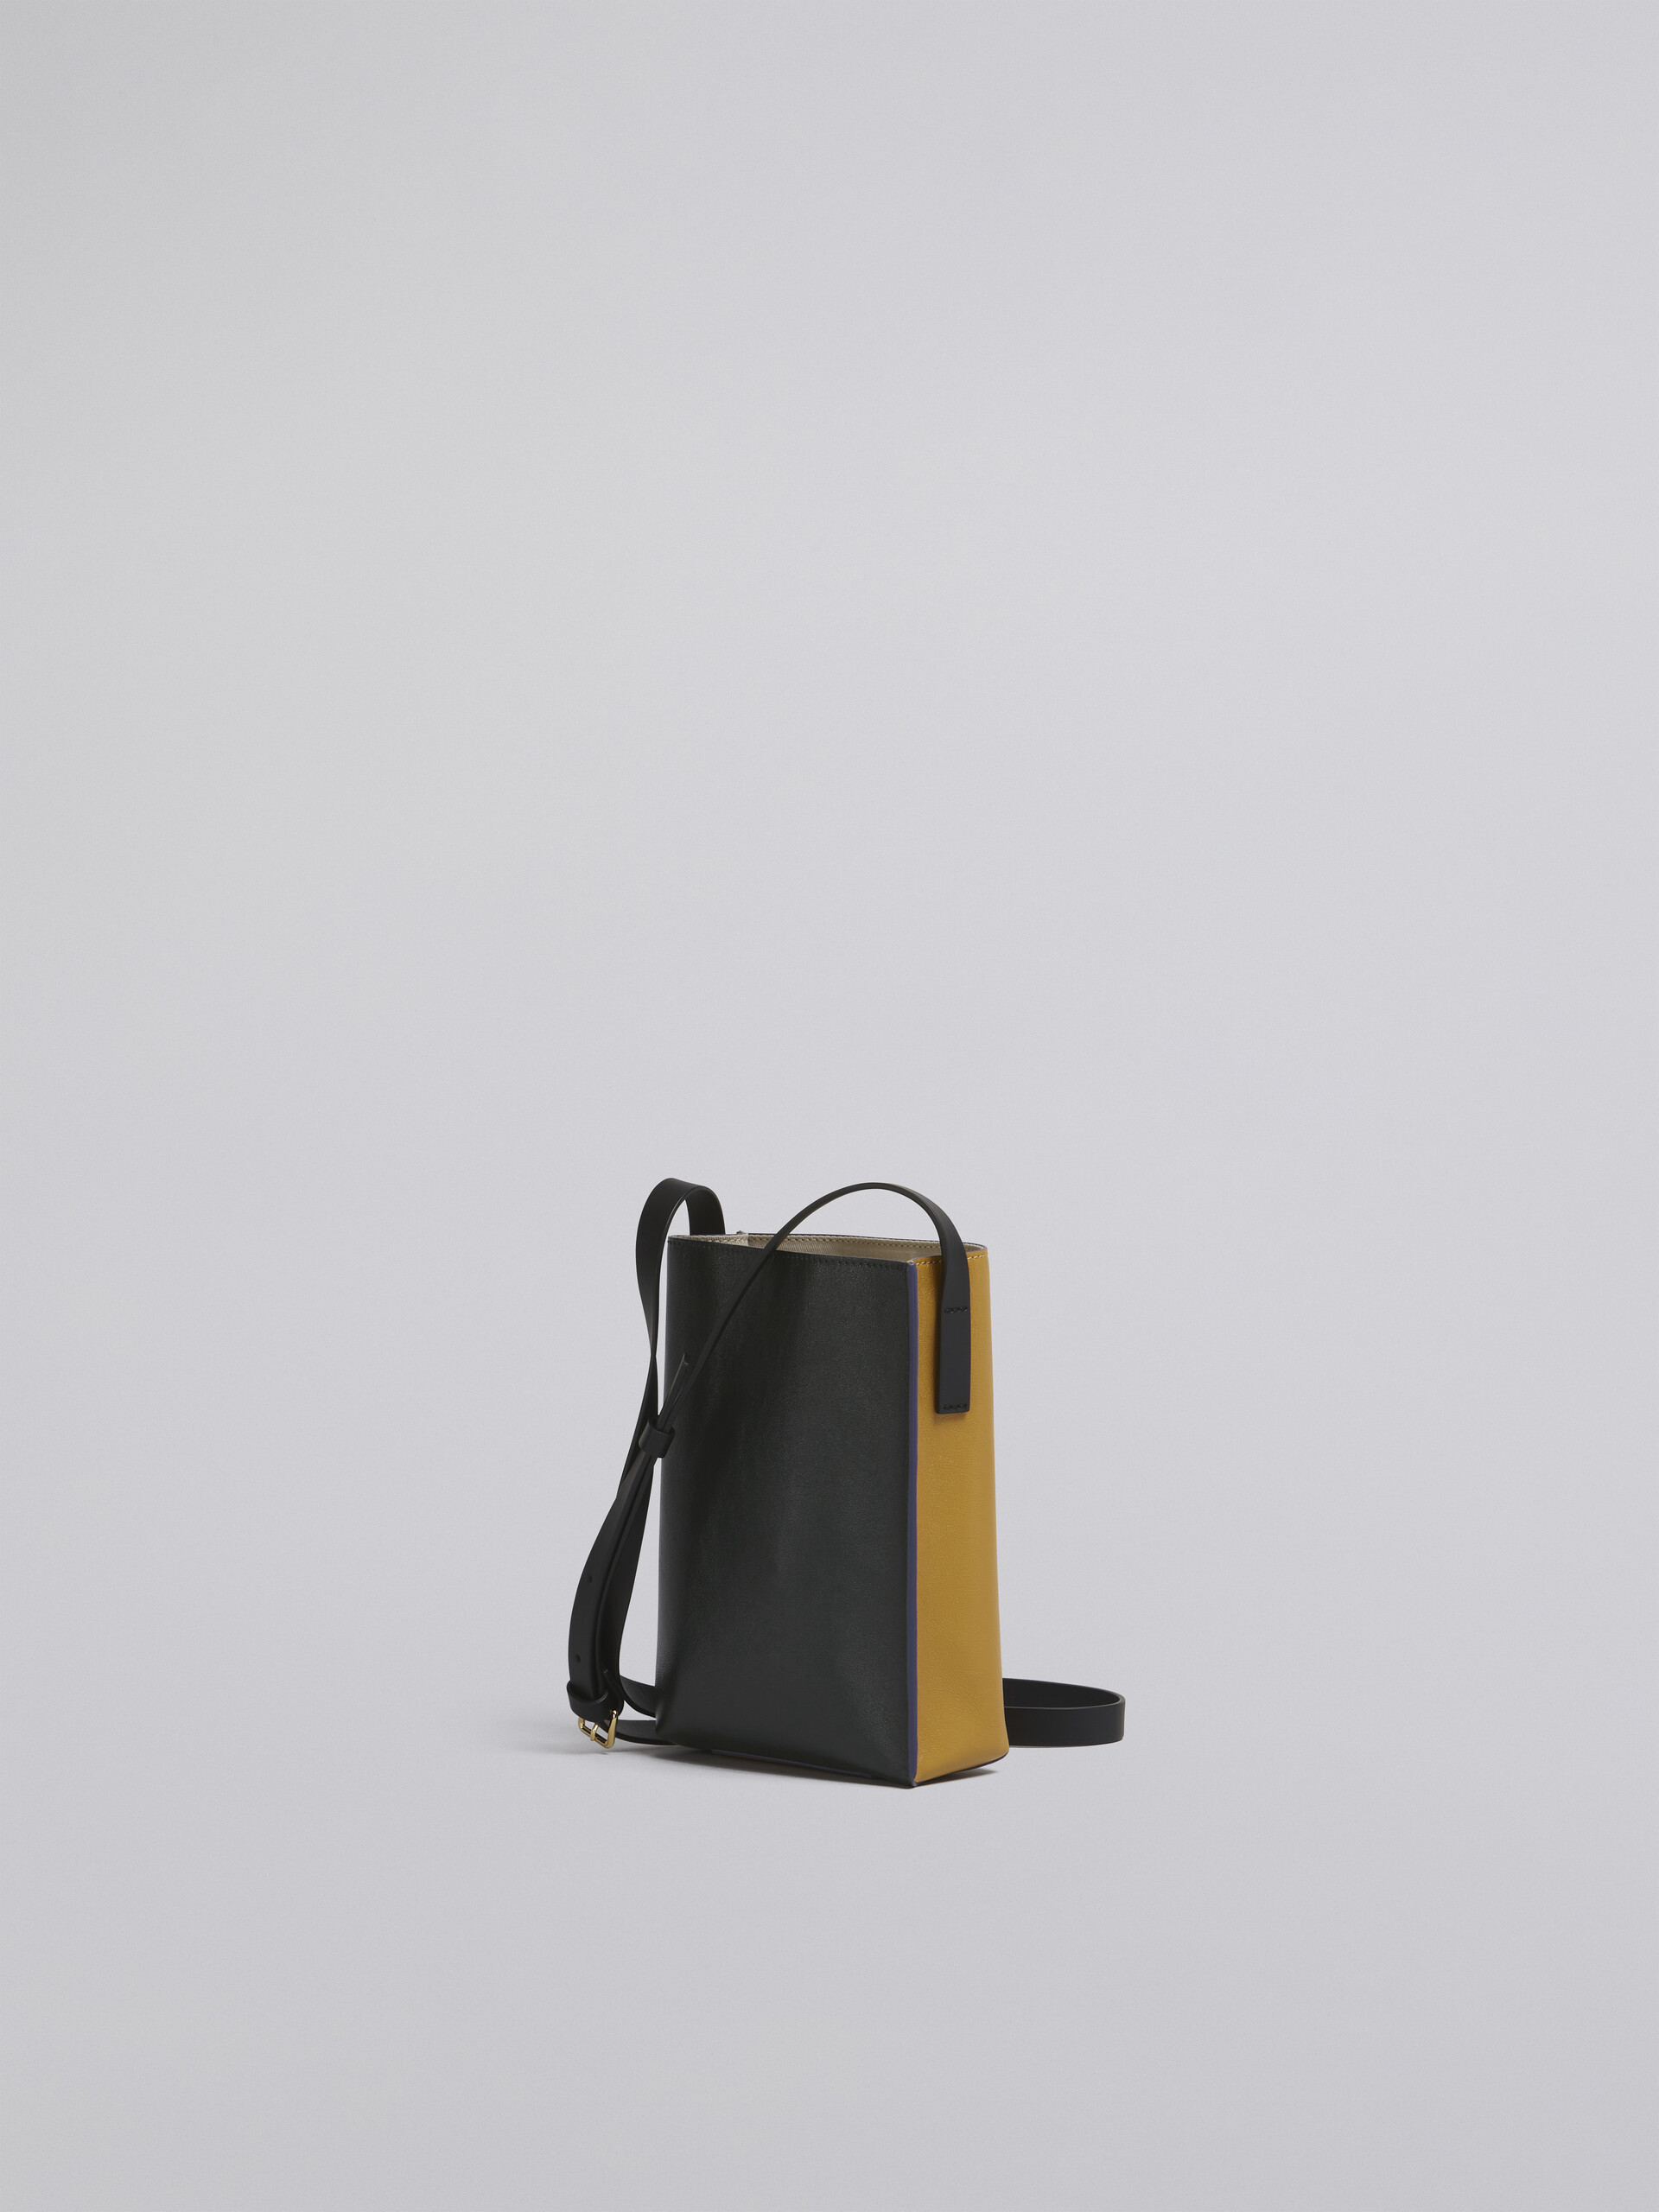 MUSEO SOFT nano bag in yellow and green leather - Shoulder Bags - Image 2